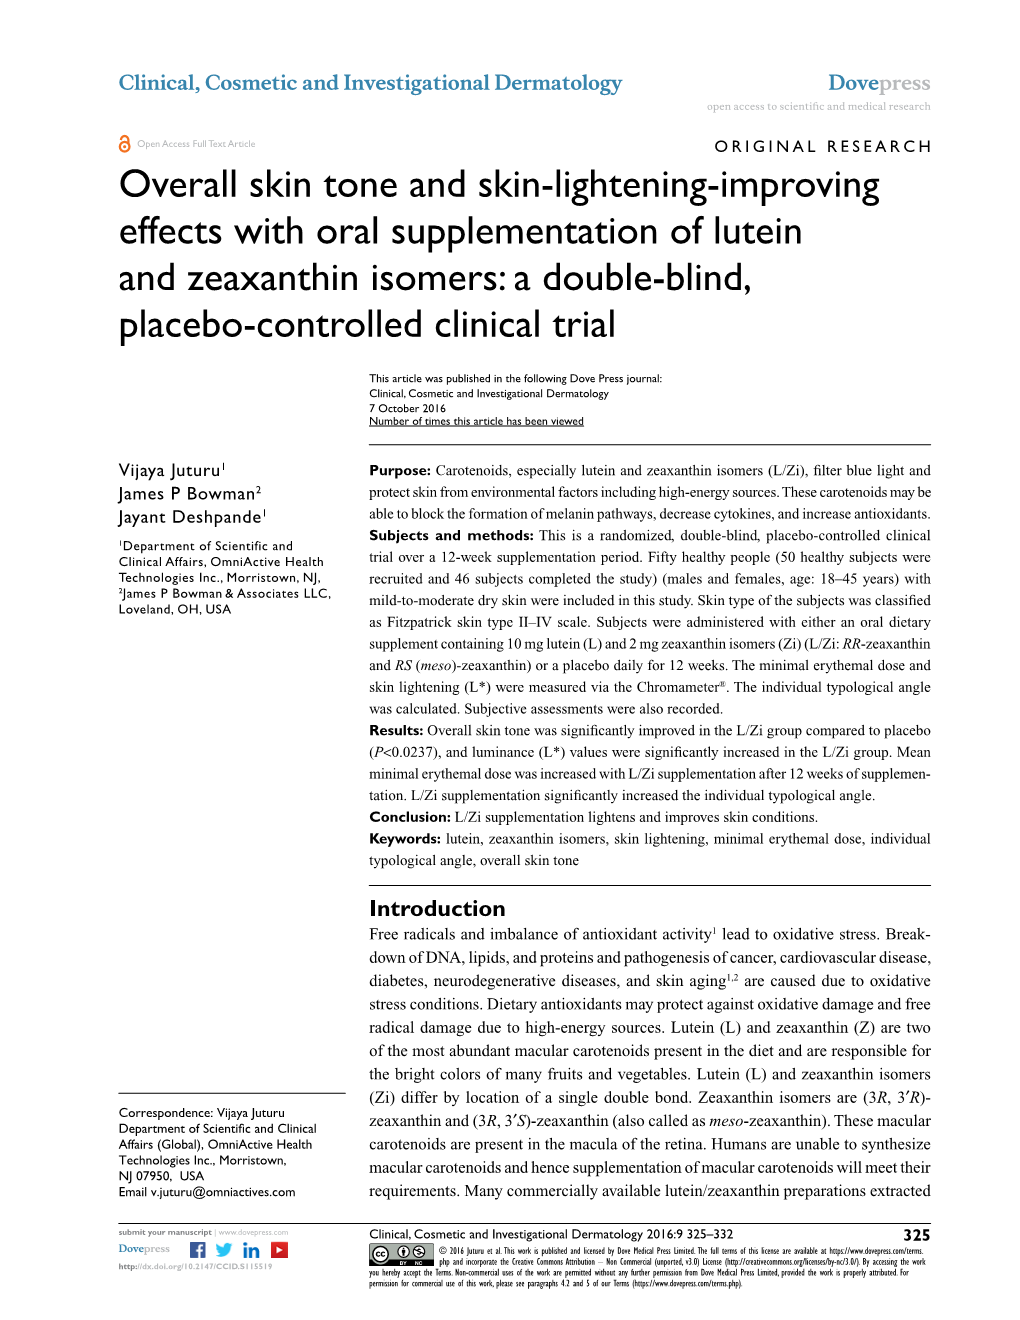 Overall Skin Tone and Skin-Lightening-Improving Effects with Oral Supplementation of Lutein and Zeaxanthin Isomers: a Double-Blind, Placebo‑Controlled Clinical Trial